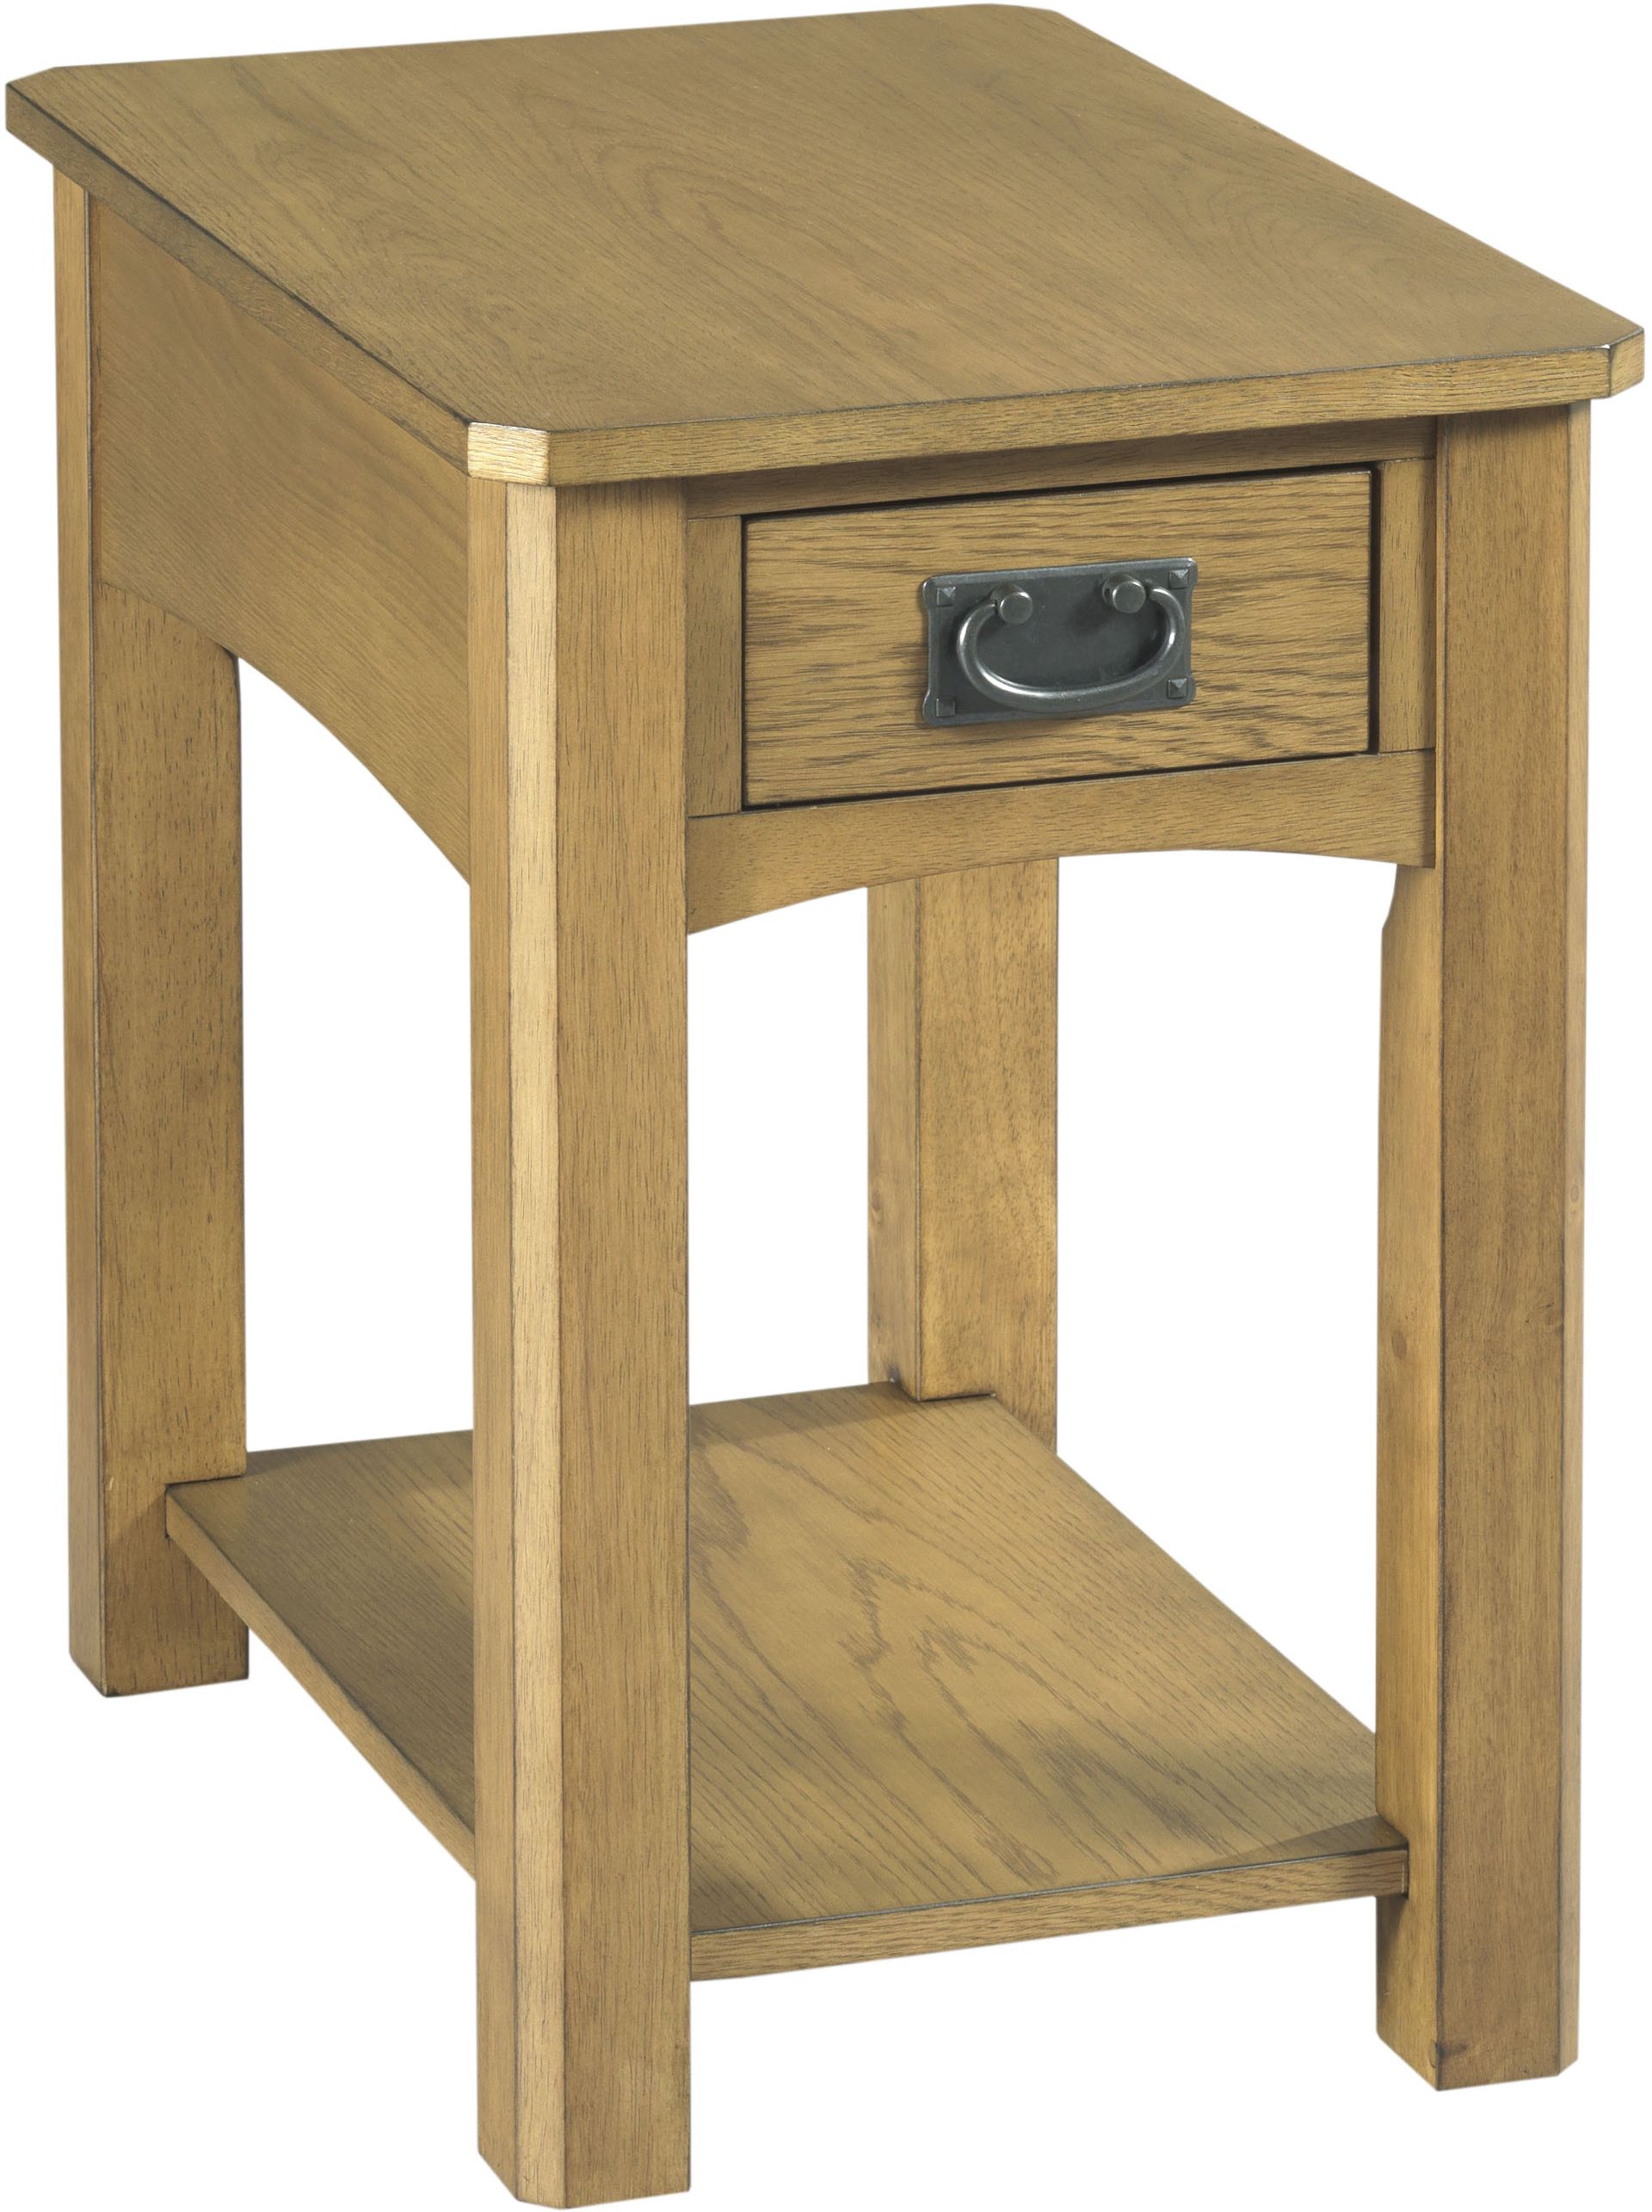 England Furniture Scottsdale Chairside Table